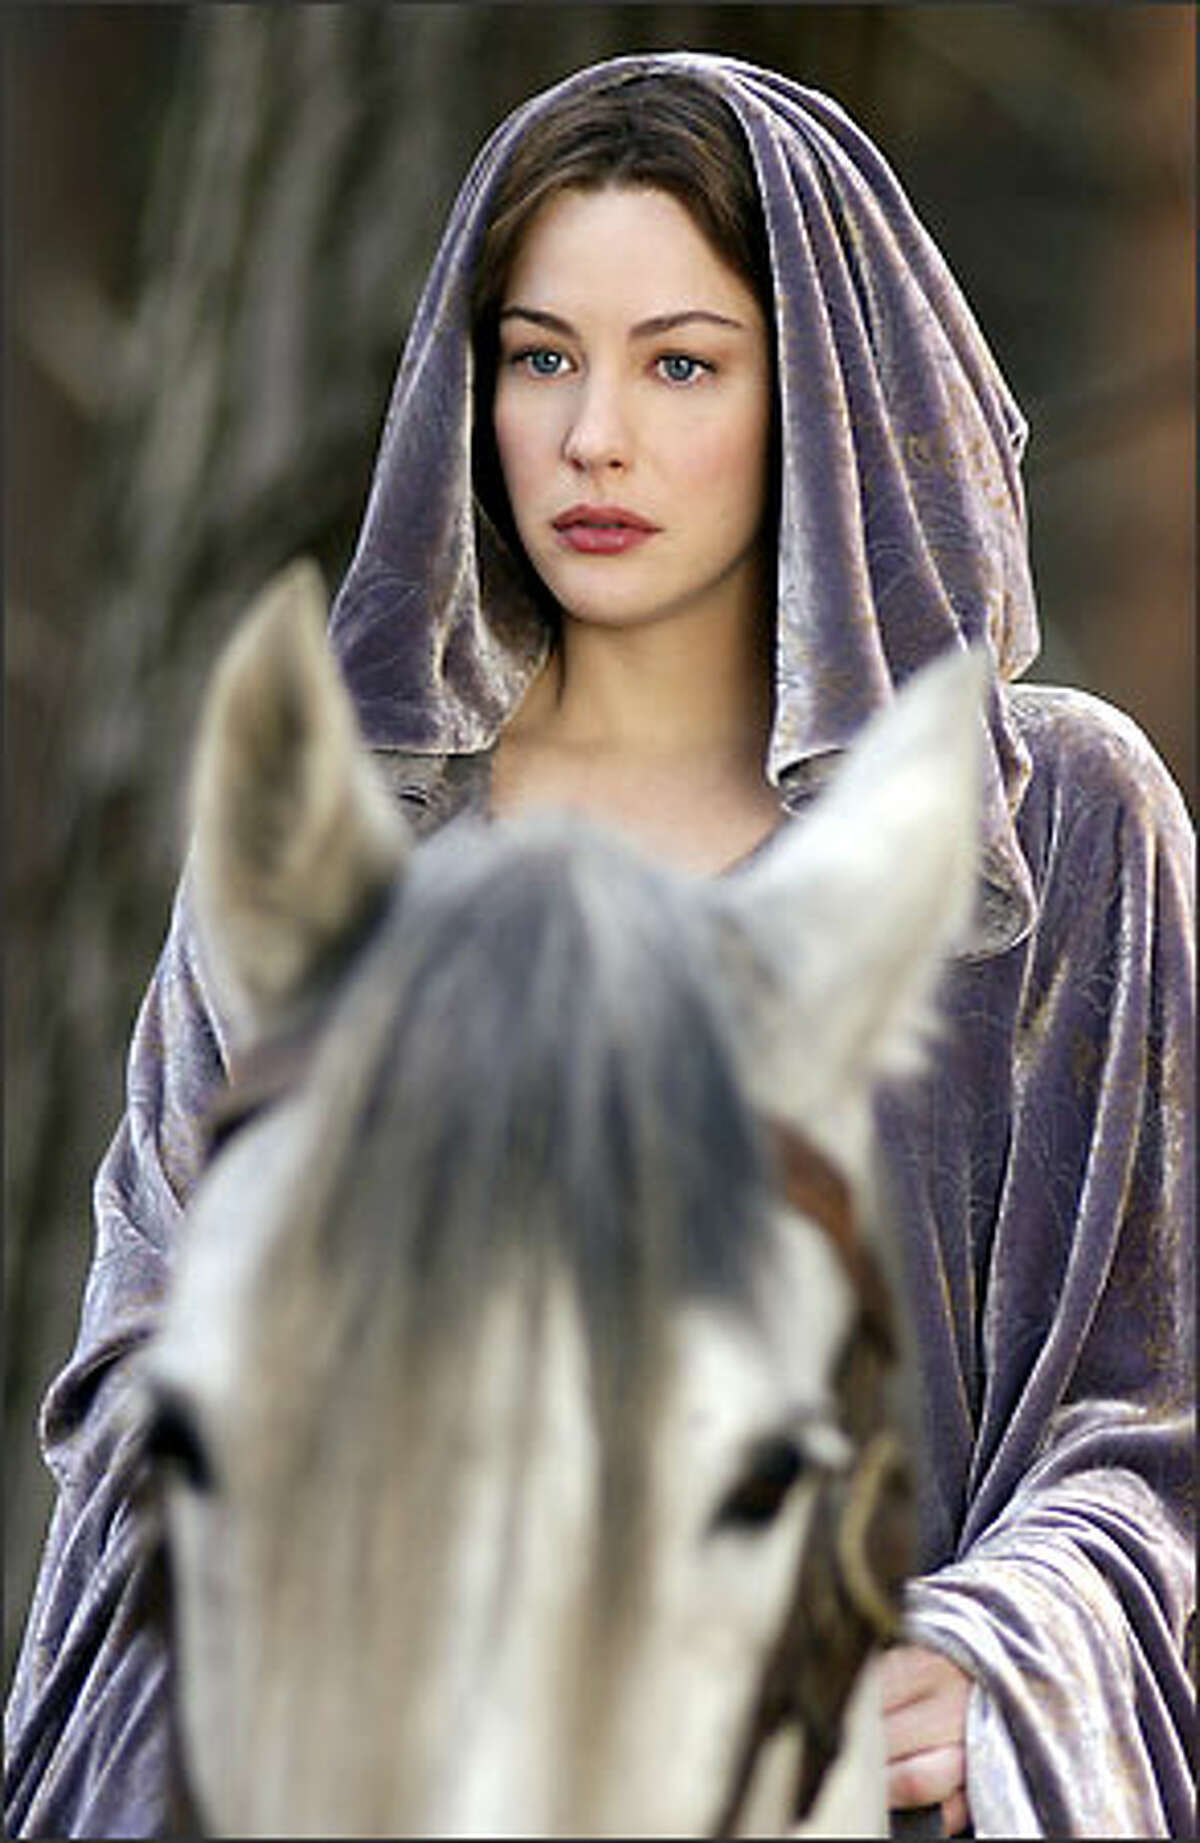 Arwen (Liv Tyler) contemplates her future -- immortality with her people or life with Aragorn, the mortal Man she loves.